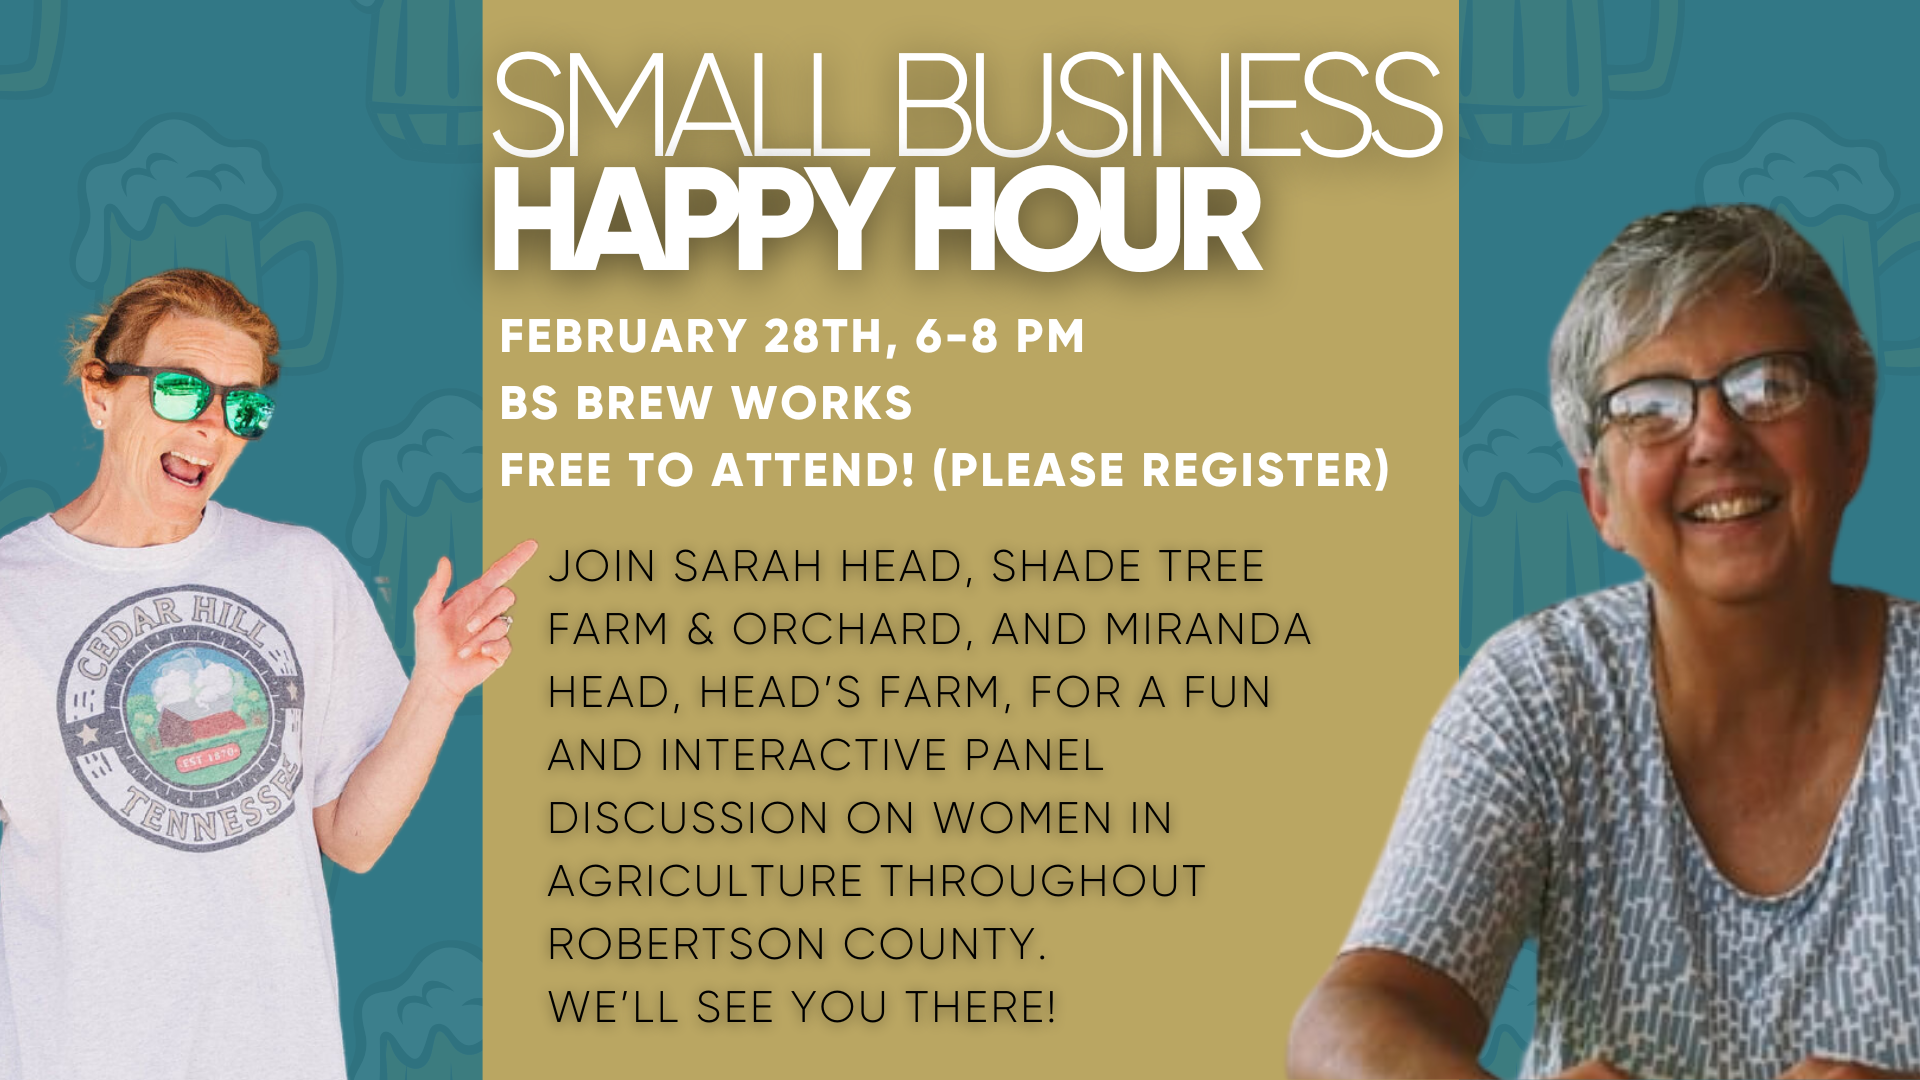 SMALL BUSINESS HAPPY HOUR TEMPLATE (3)